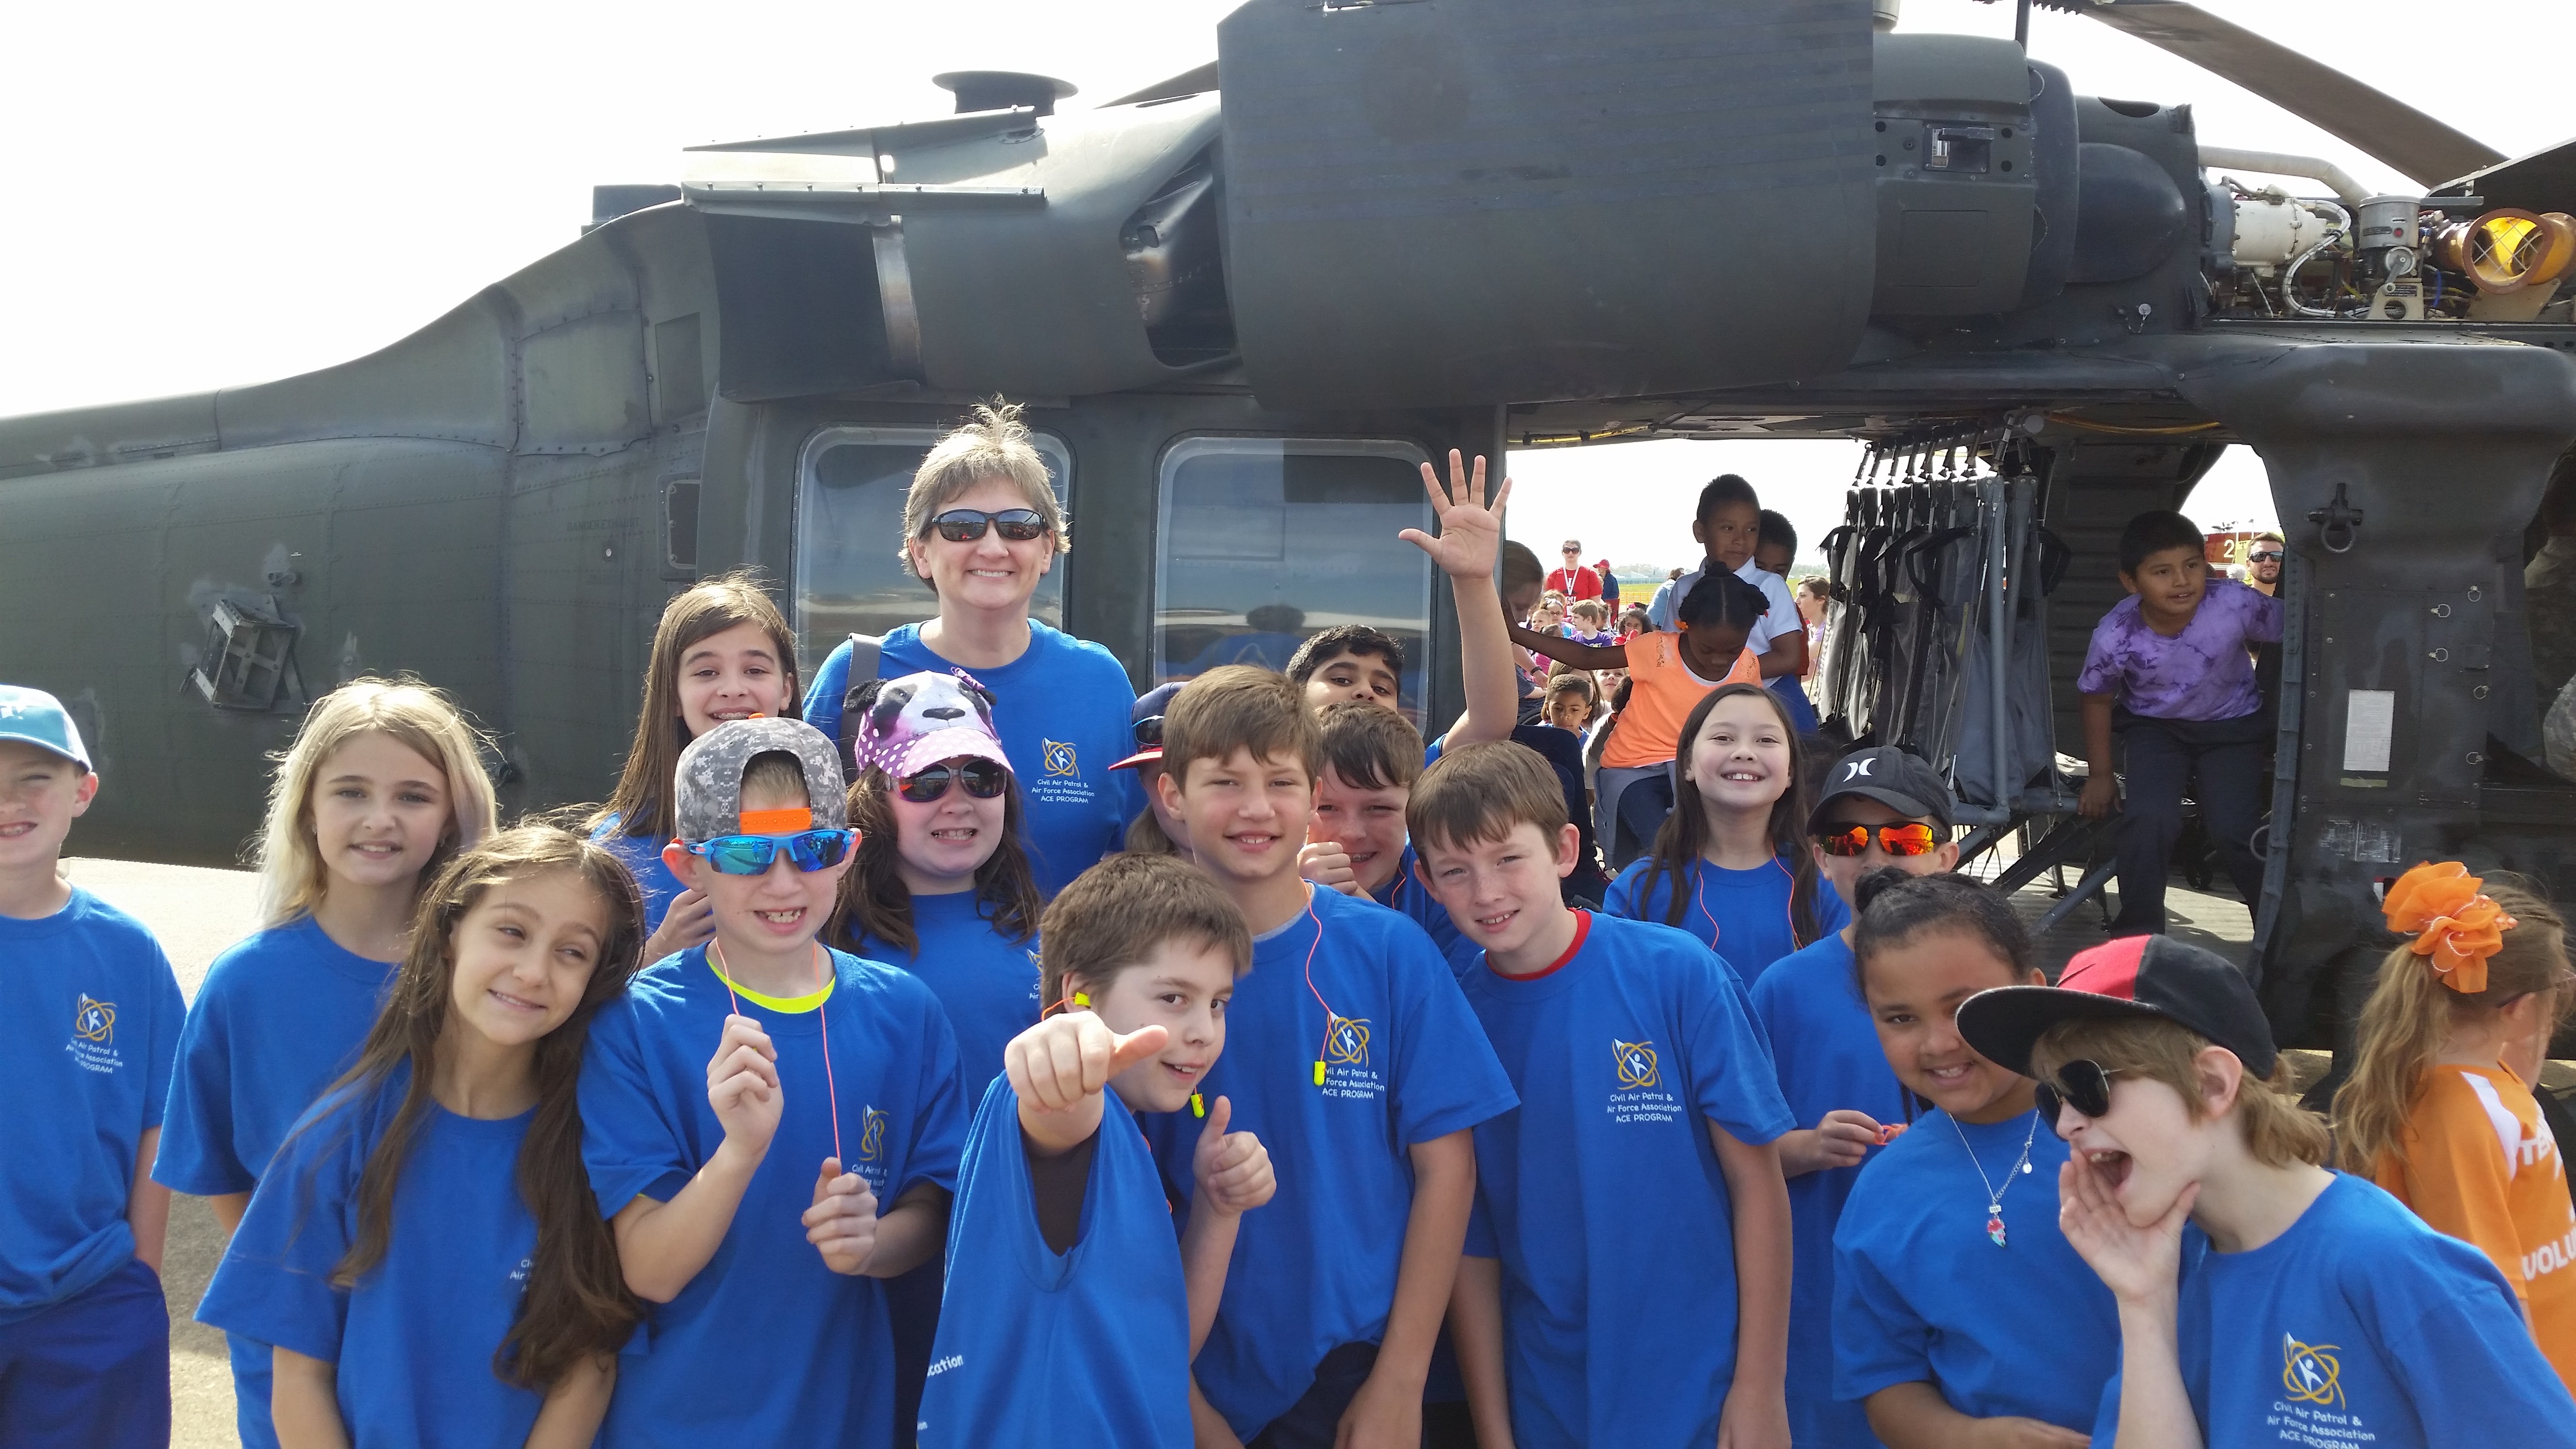 STEM coordinator Suzanne Costner visits an air show with her students from Fairview Elementary School in Tennessee.